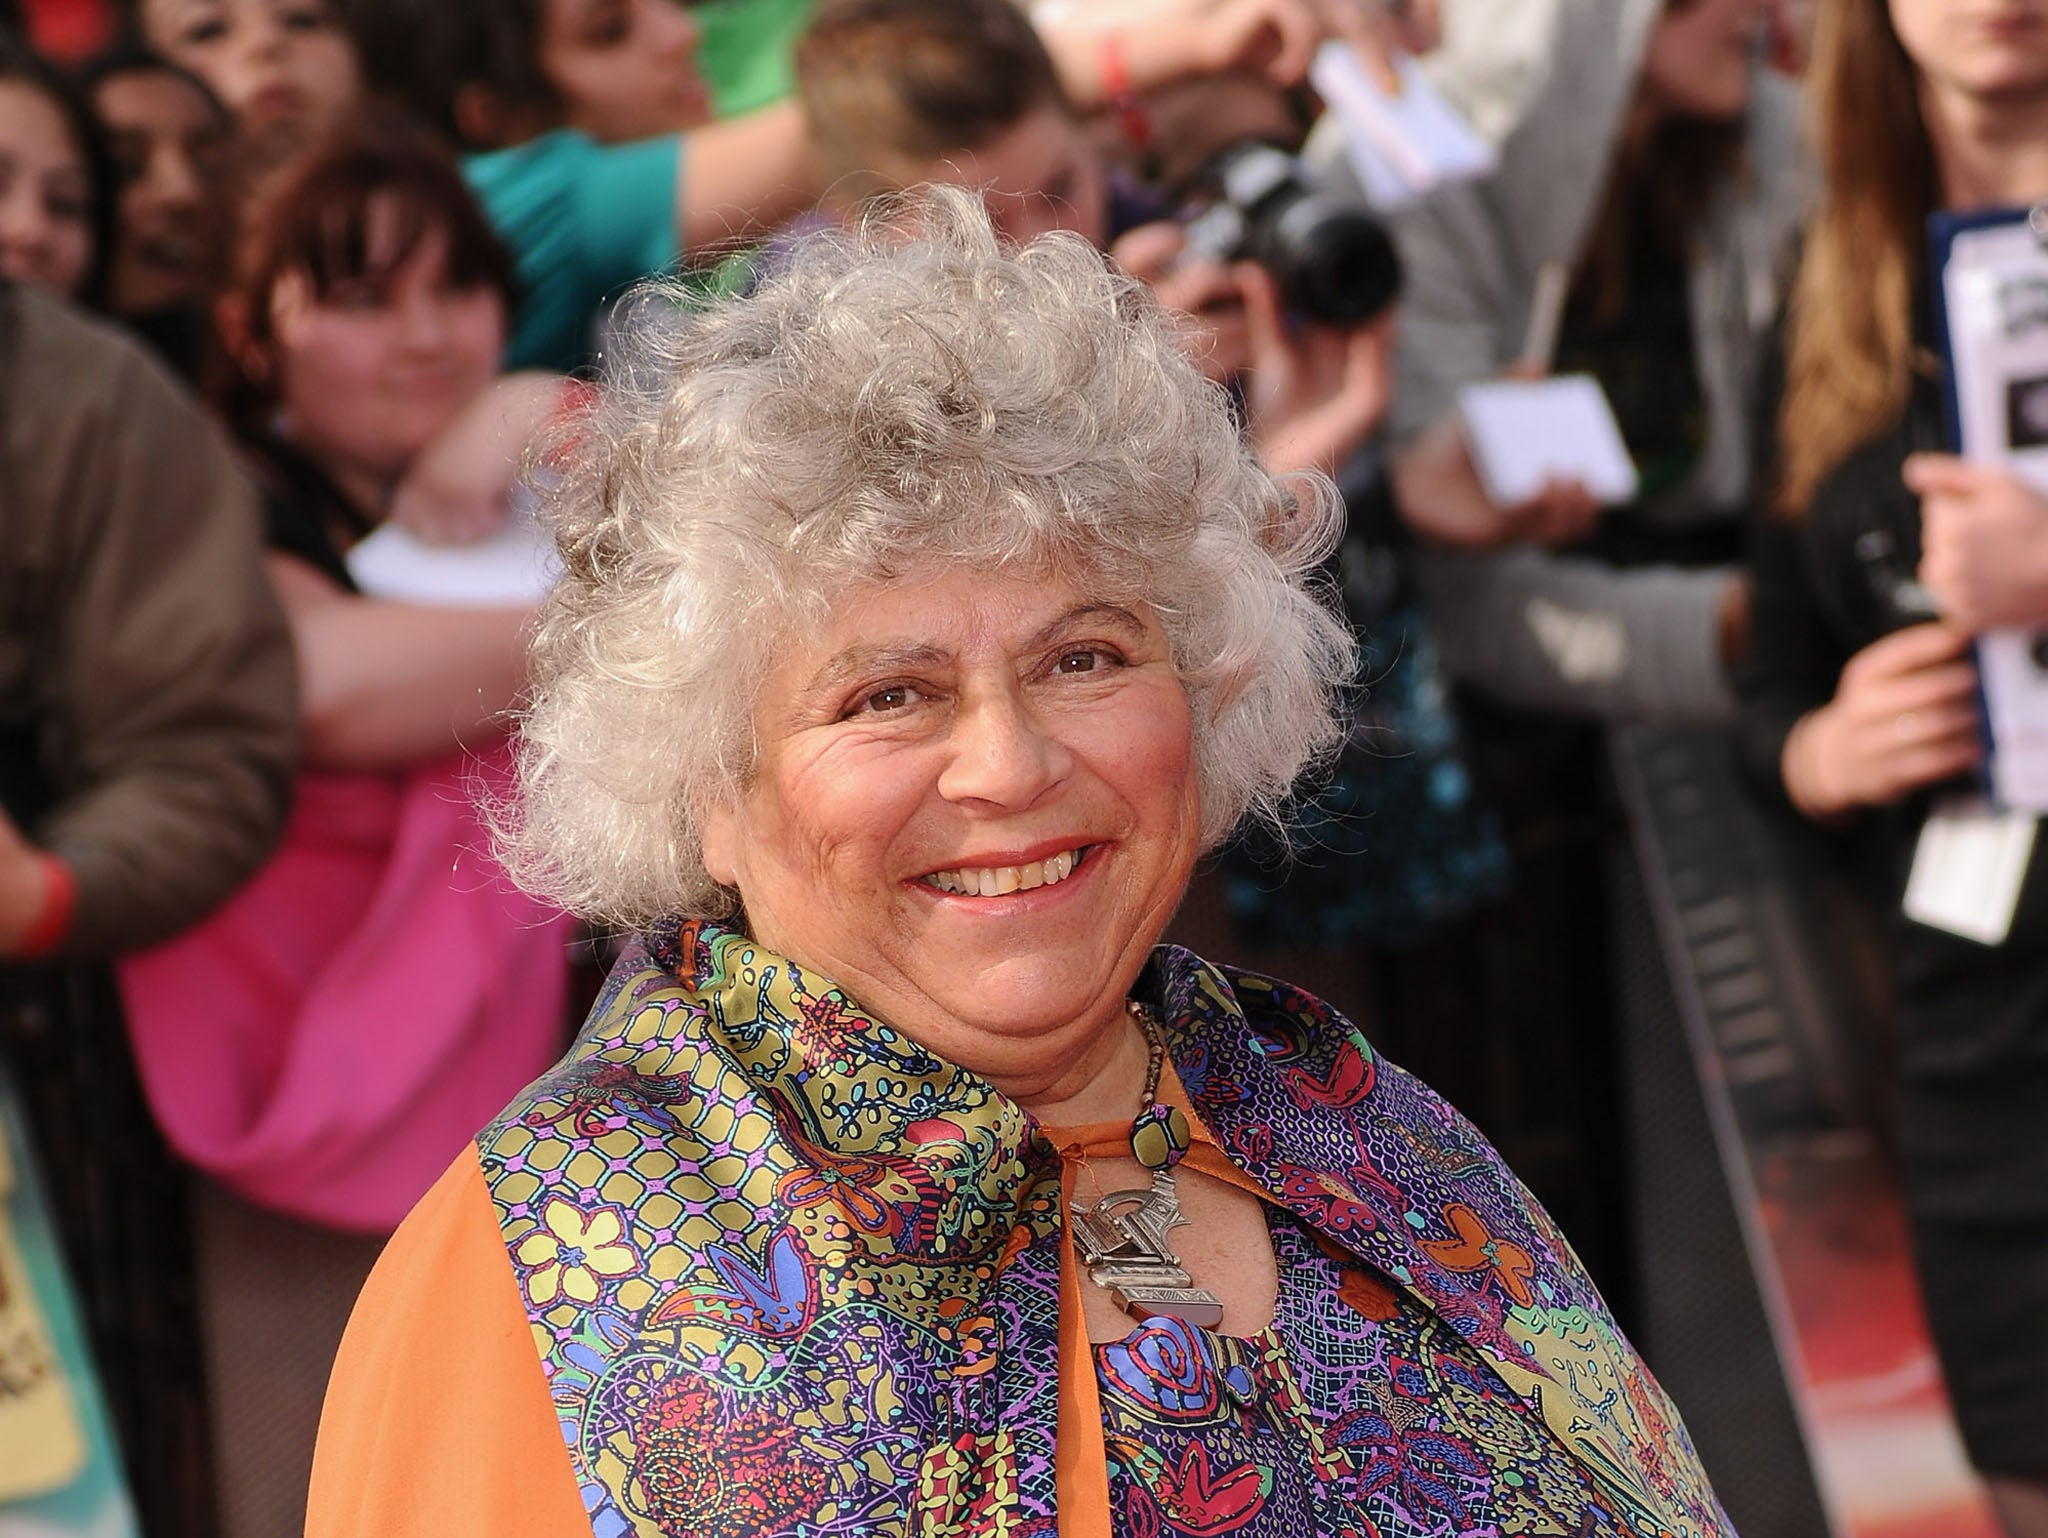 The Jewish actress played Professor Sprout in the Harry Potter film adaptations